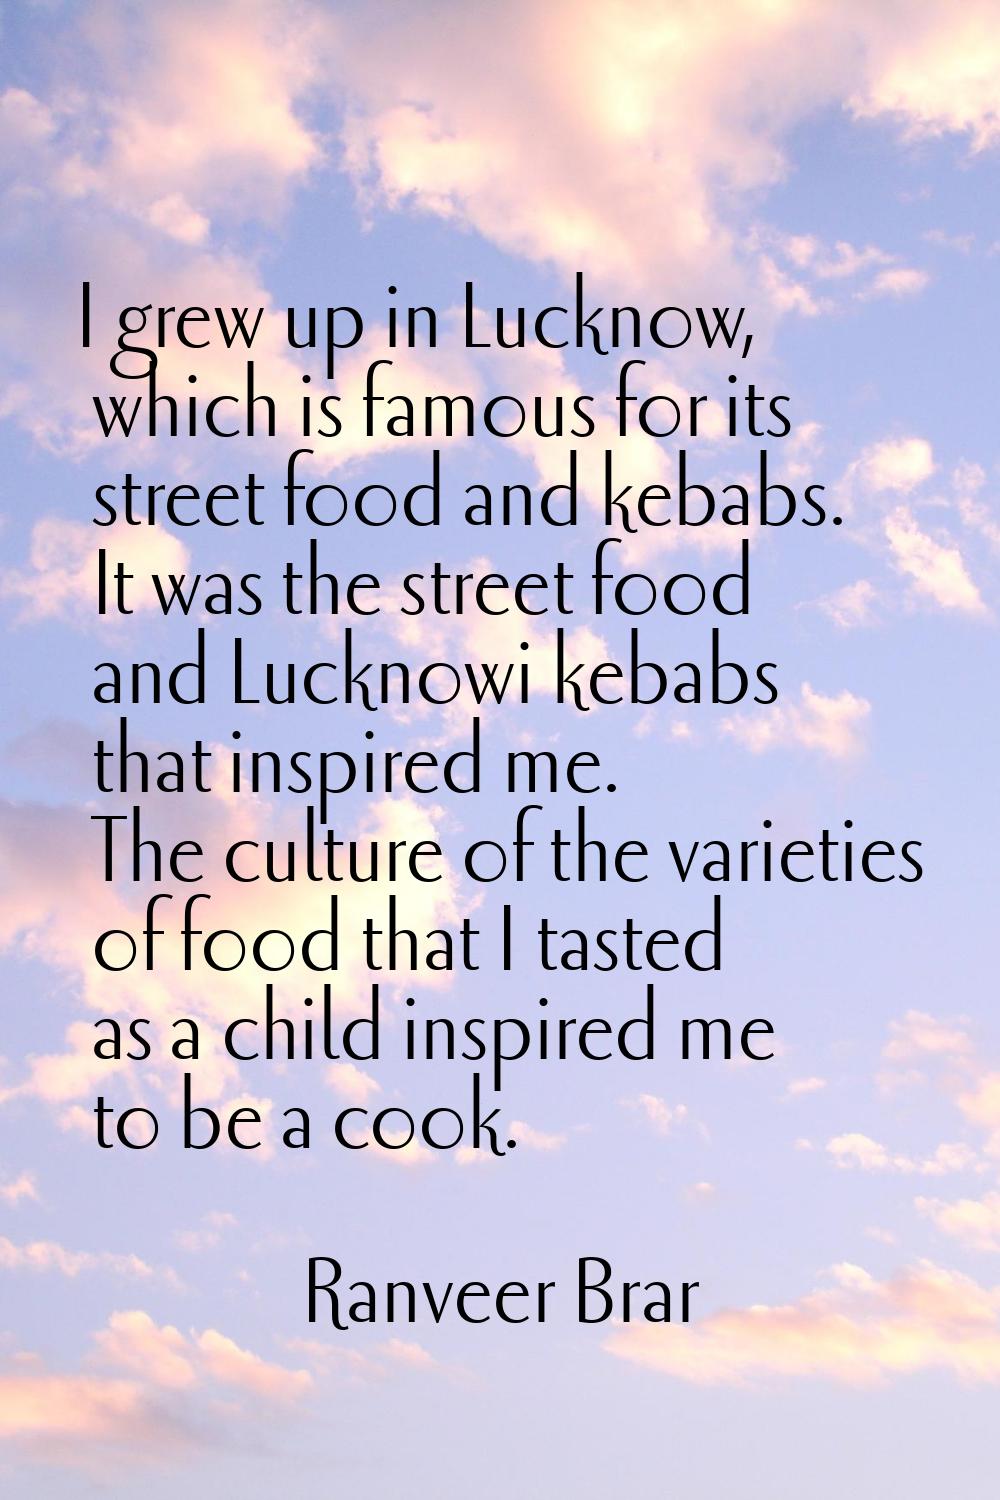 I grew up in Lucknow, which is famous for its street food and kebabs. It was the street food and Lu